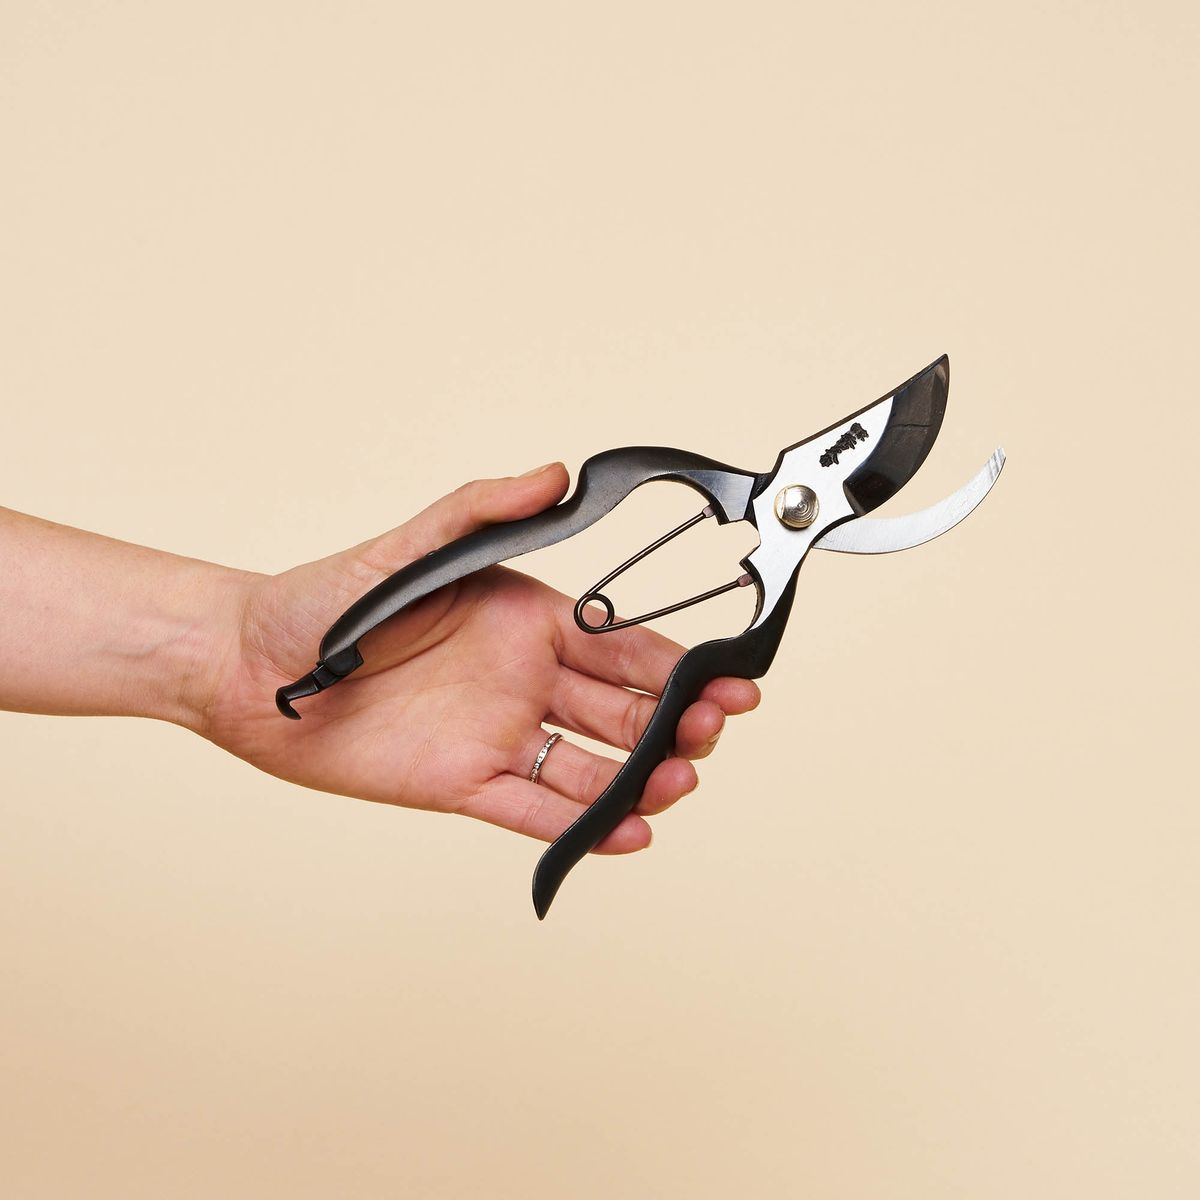 A hand holding sharp gardening pruning shears with a black handle